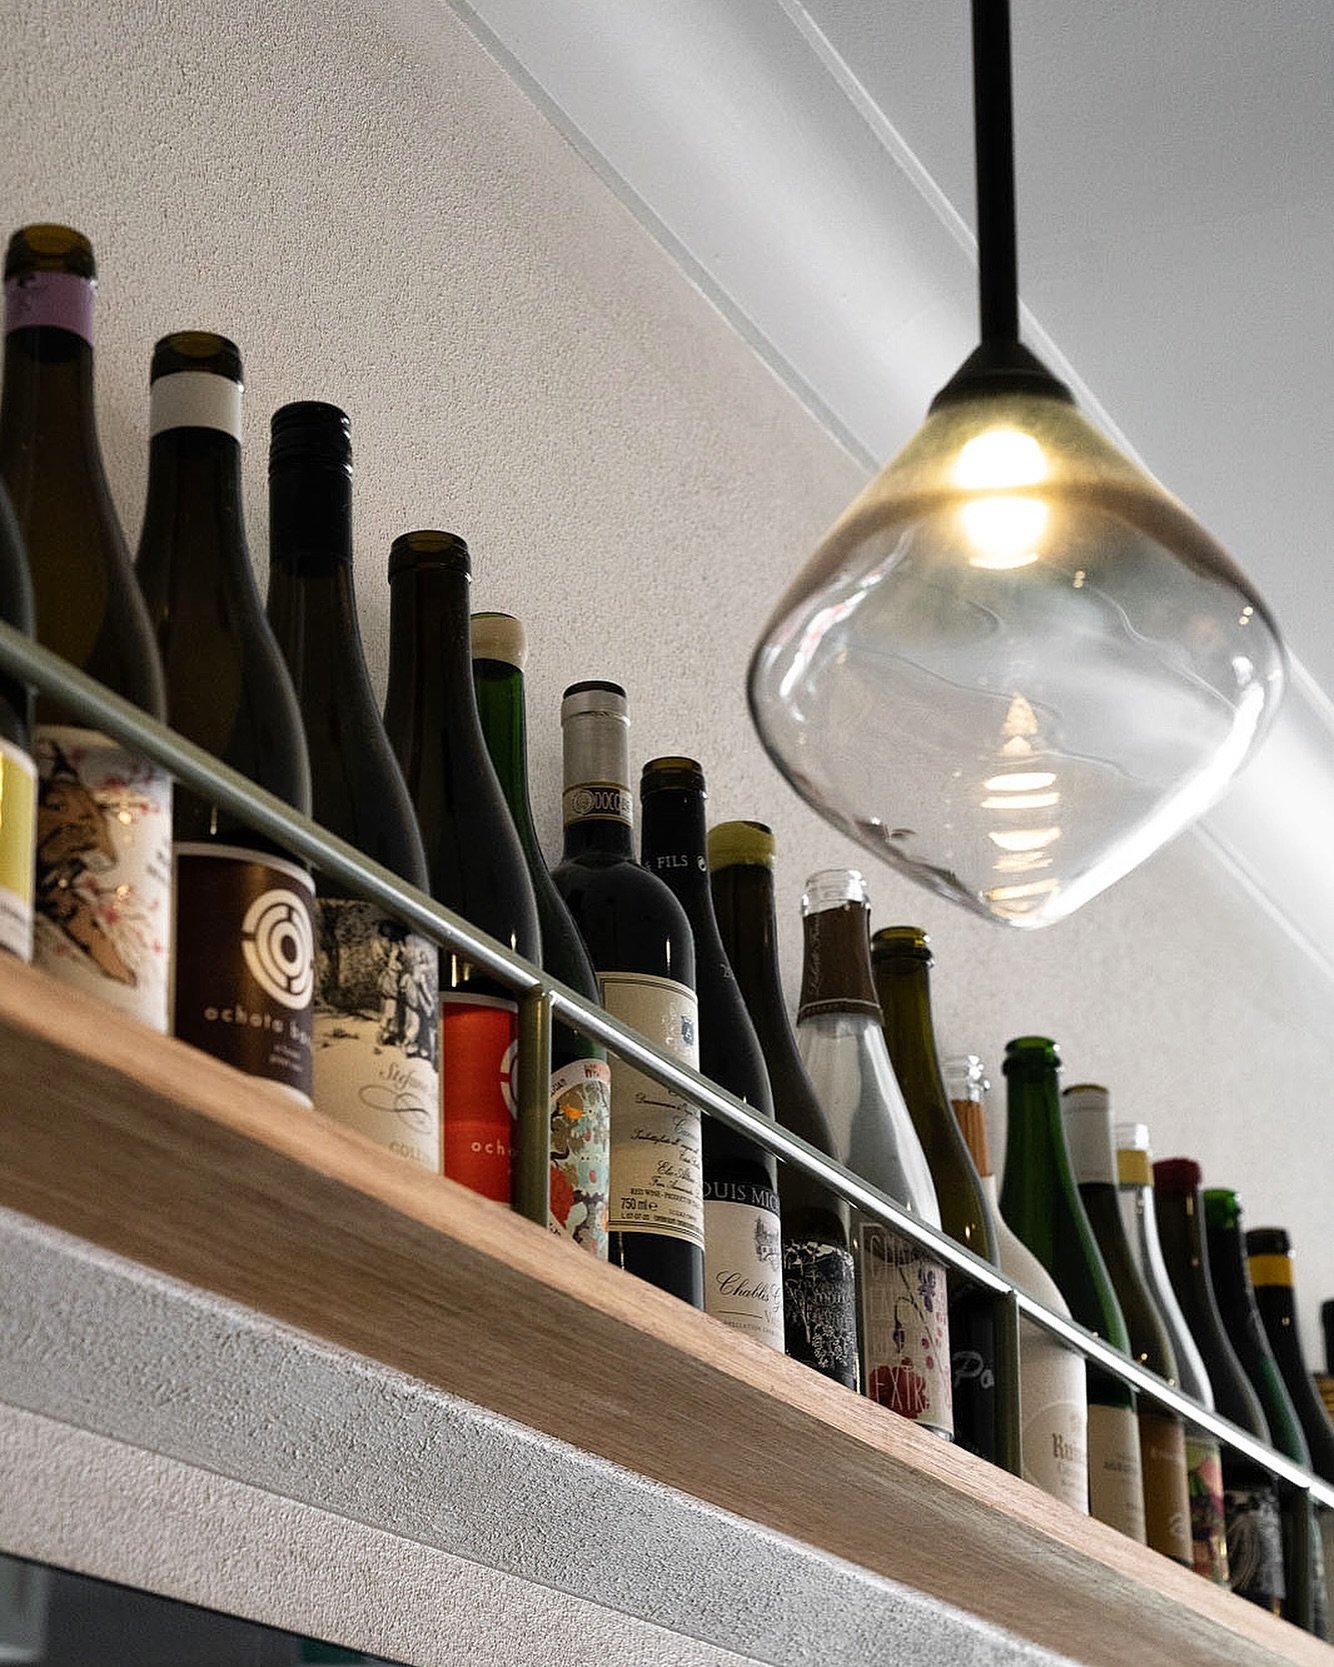 Our @soktas pendant lights. Designed and hand-blown individually in Currumbin by Oliver and Ryan.